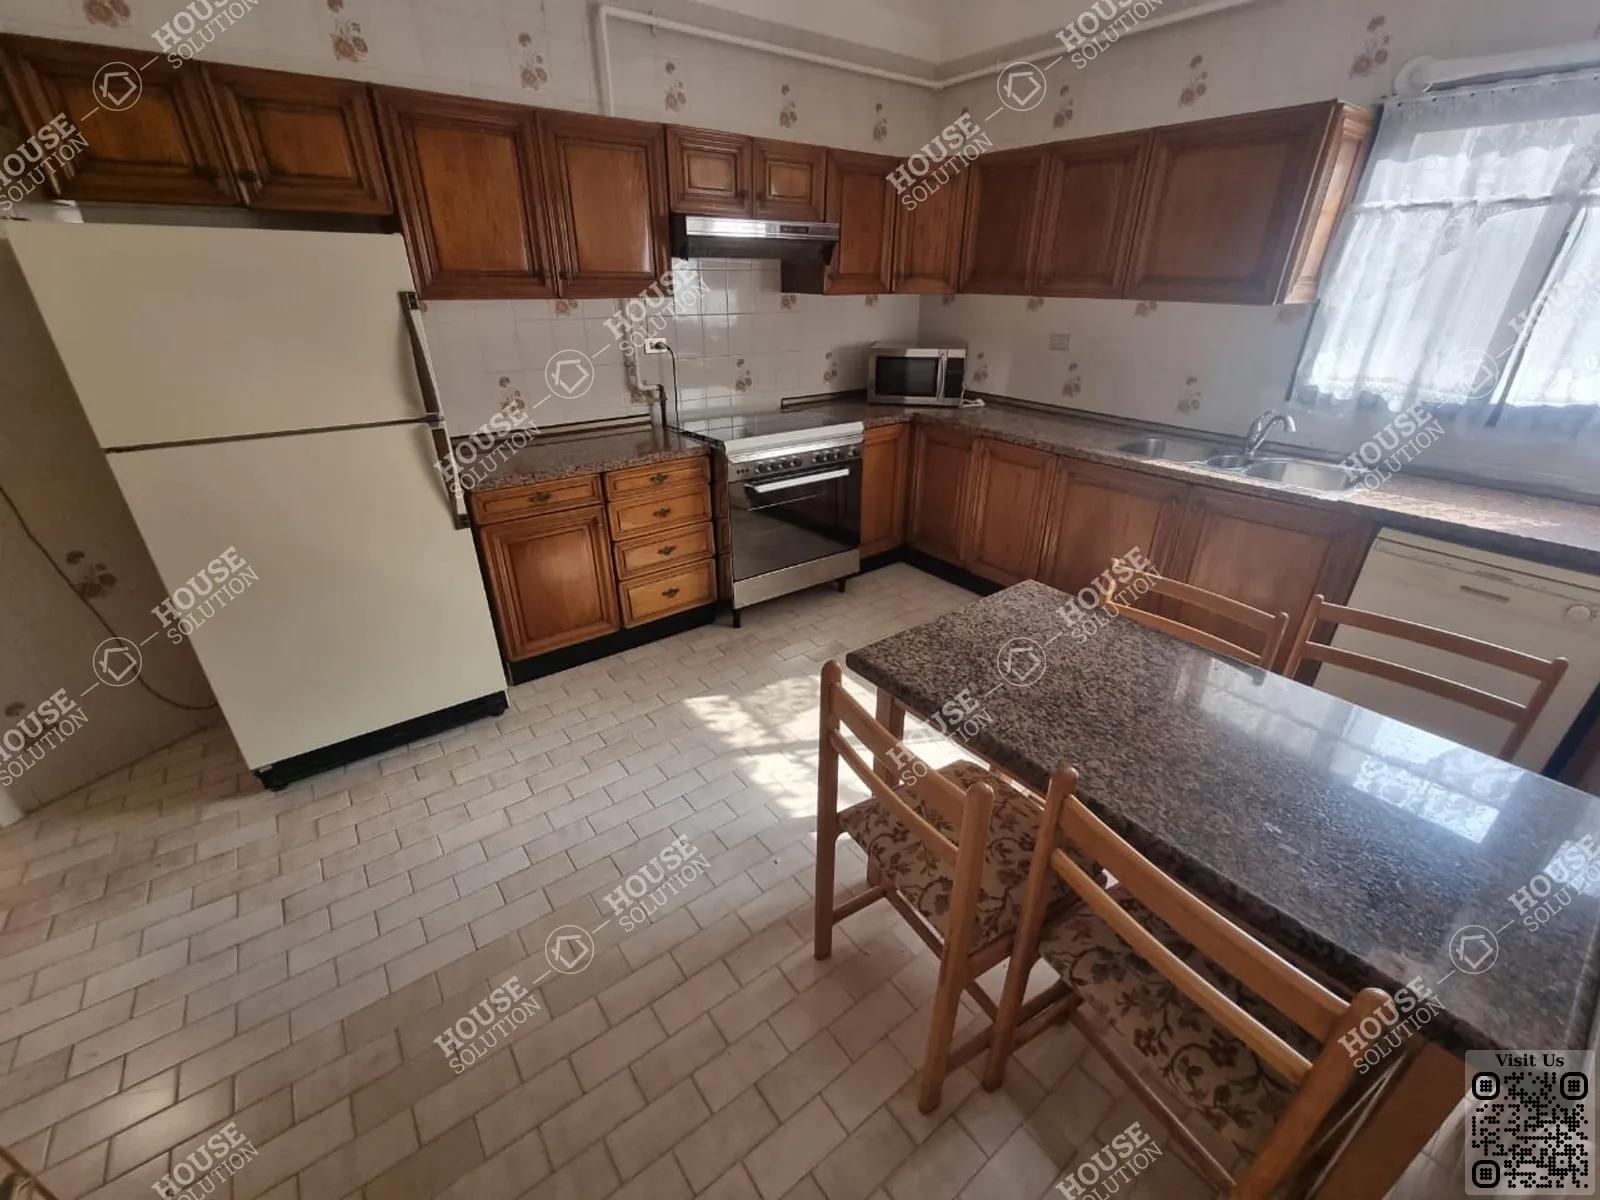 KITCHEN  @ Apartments For Rent In Maadi Maadi Sarayat Area: 220 m² consists of 4 Bedrooms 3 Bathrooms Furnished 5 stars #5638-1